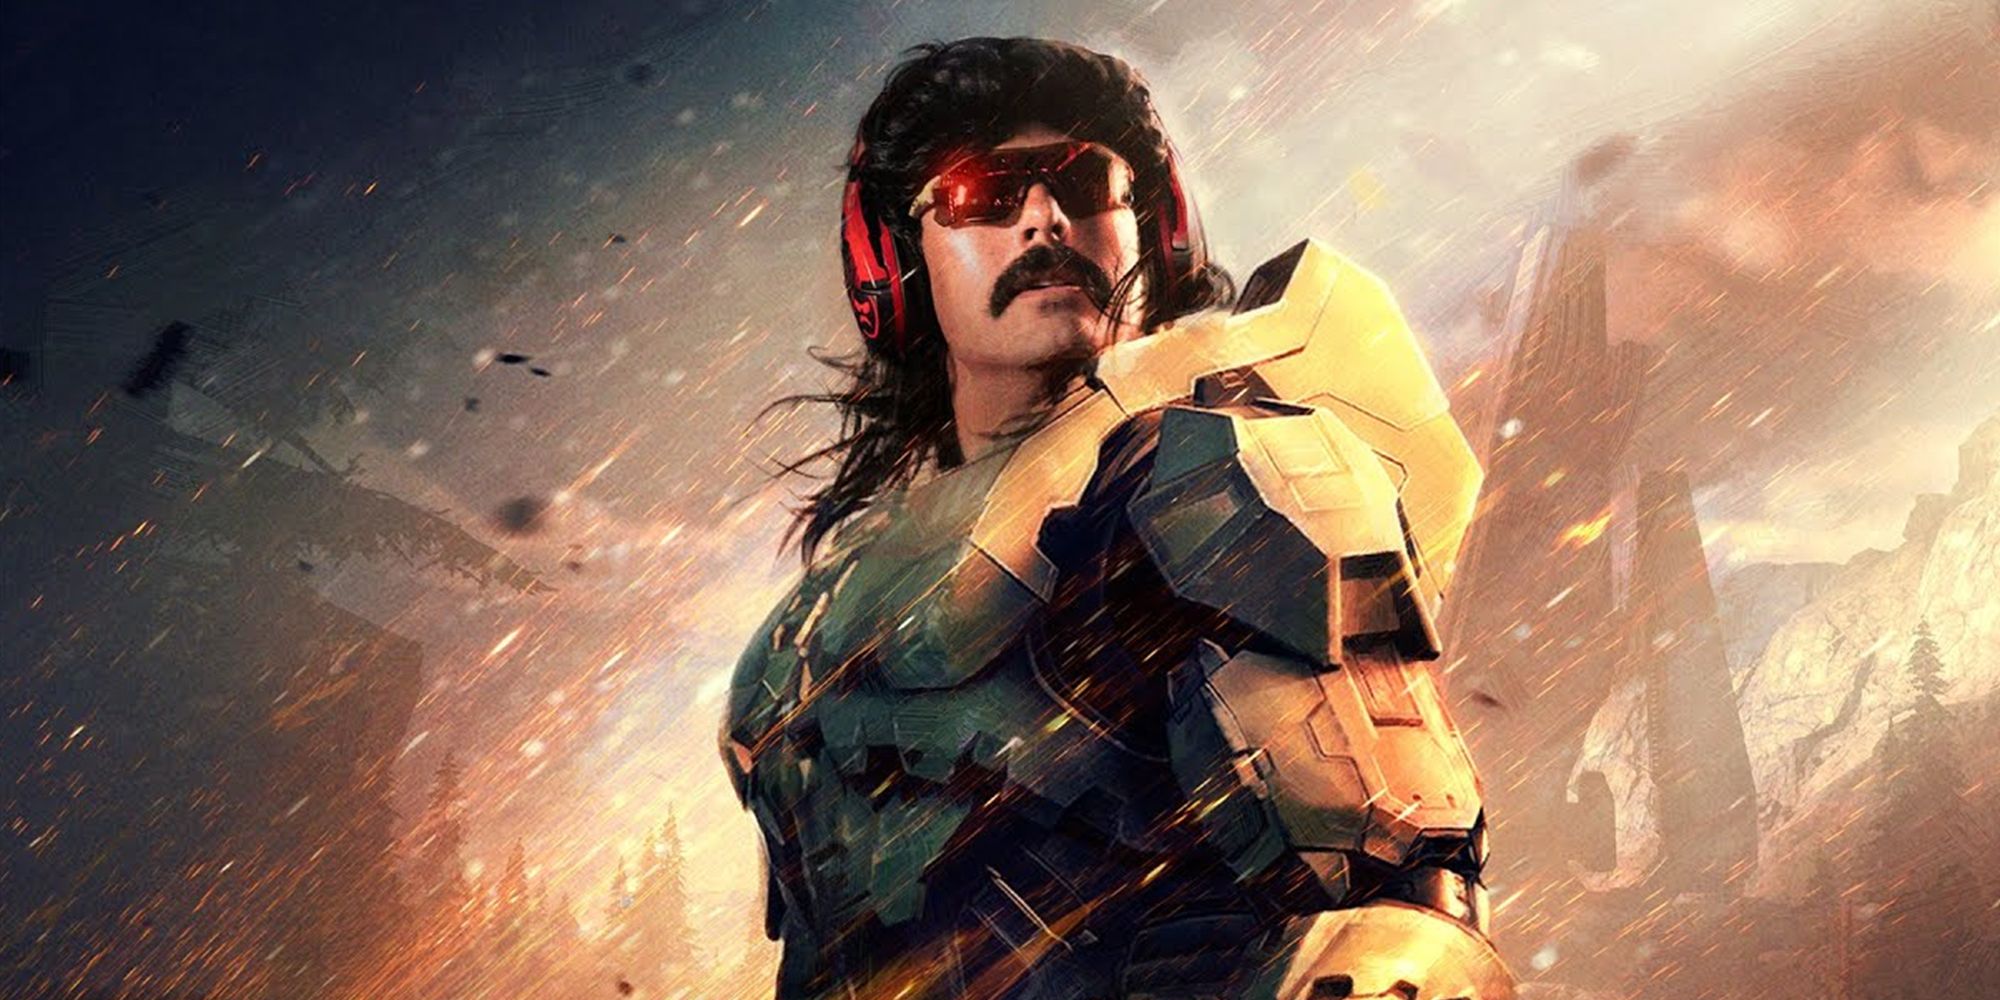 Halo Infinite - Dr Disrespect's Photoshopped Image Of Him As Master Chief